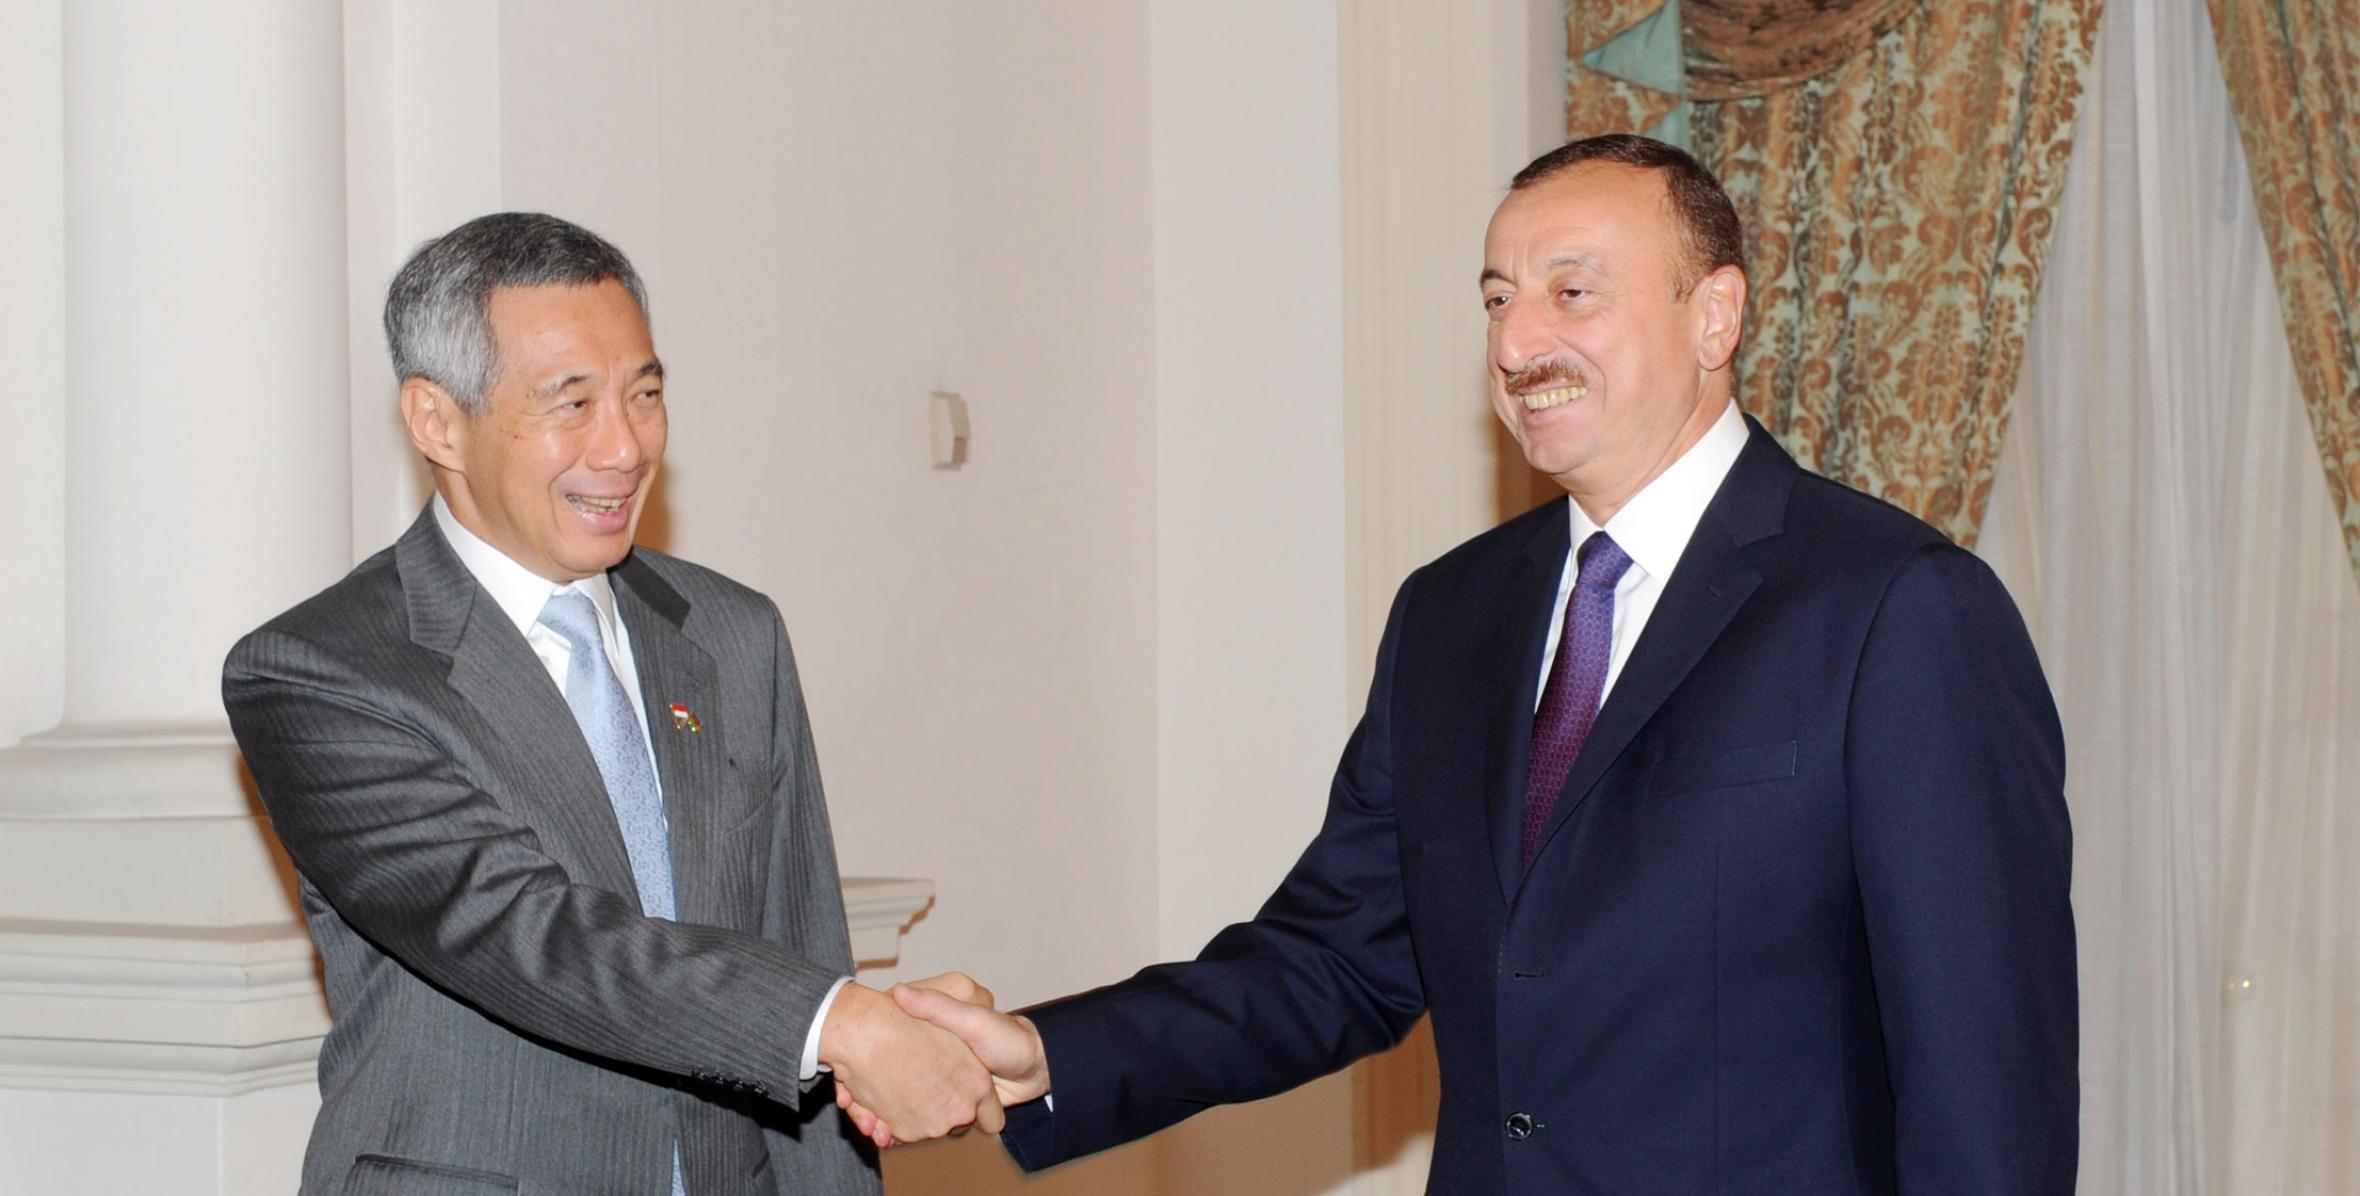 Ilham Aliyev met with Prime Minister of Singapore Lee Hsien Loong